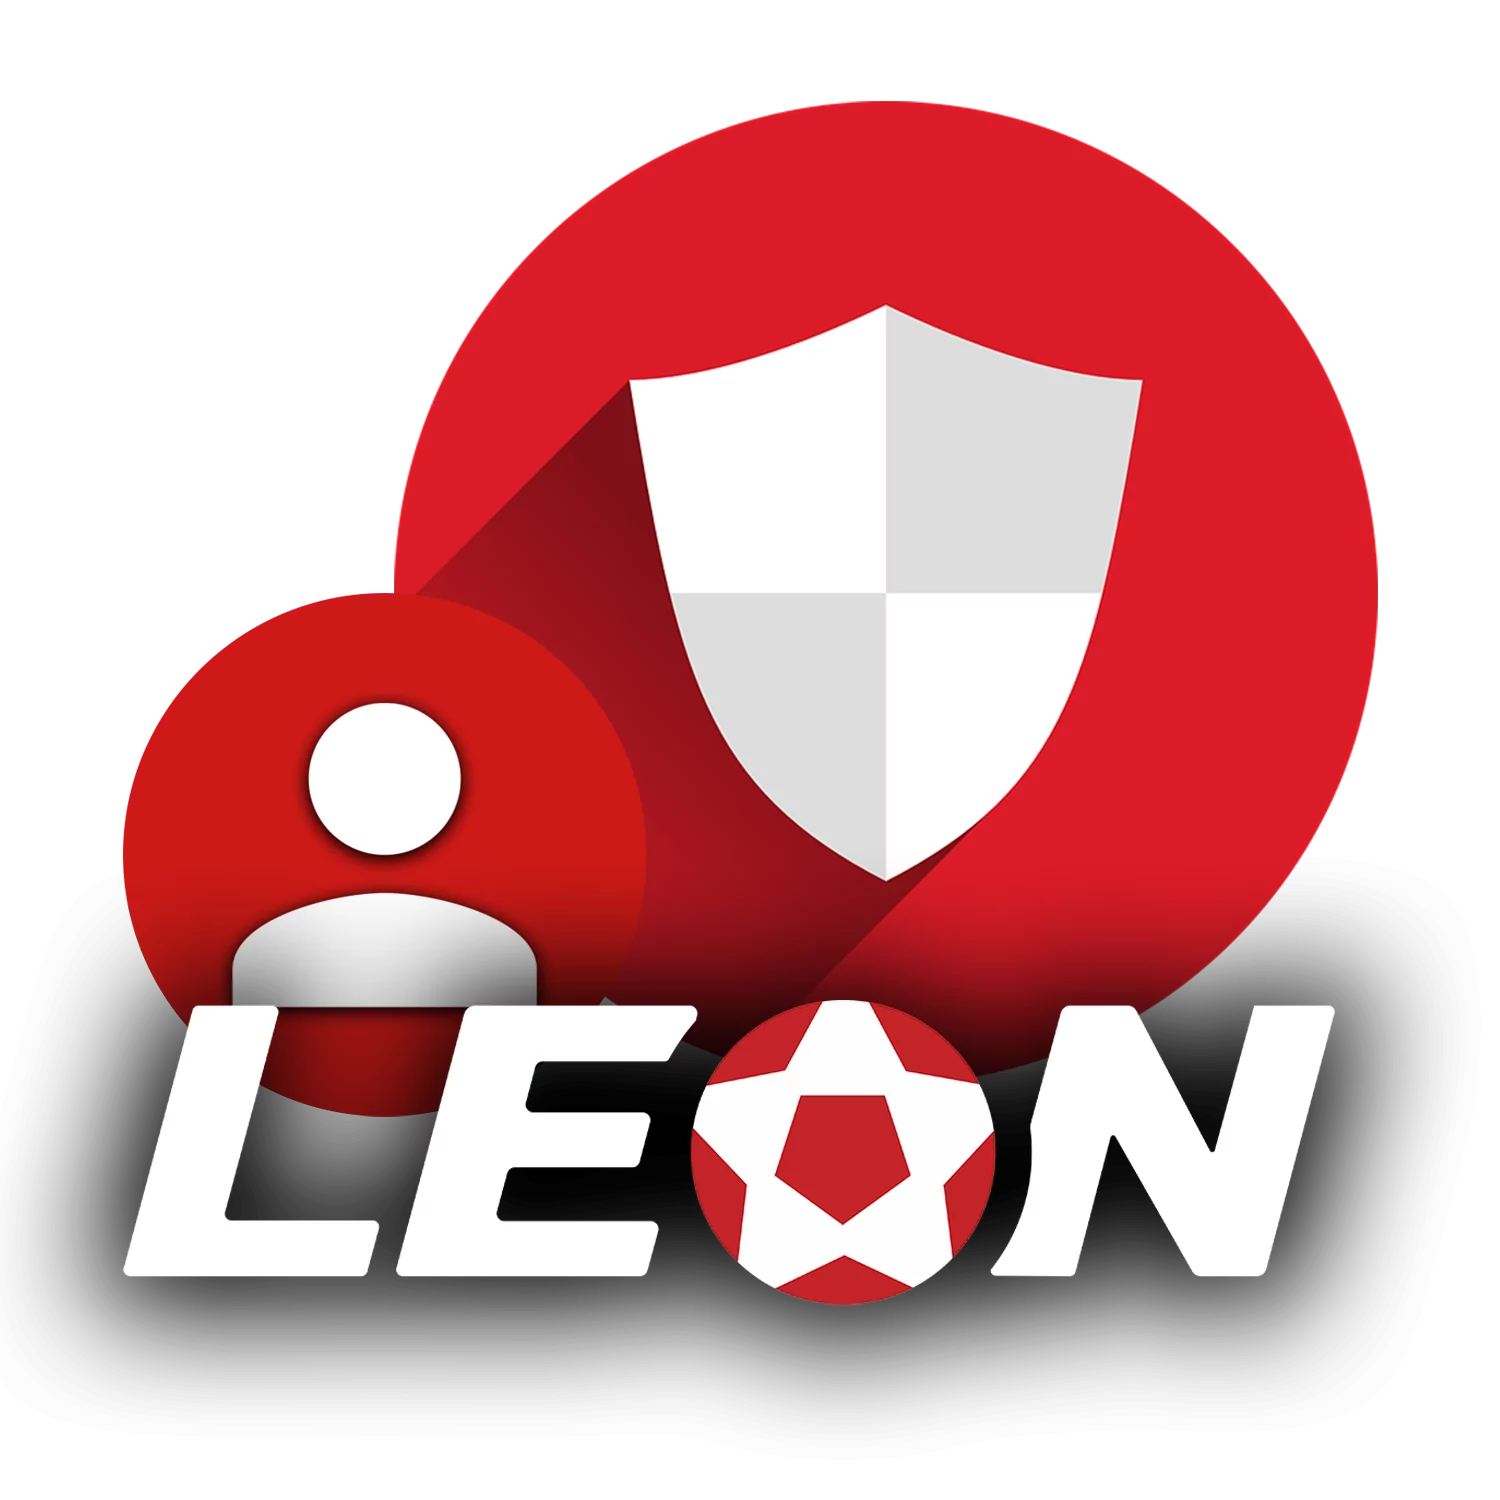 Learn more about what data does Leon collect and what for.